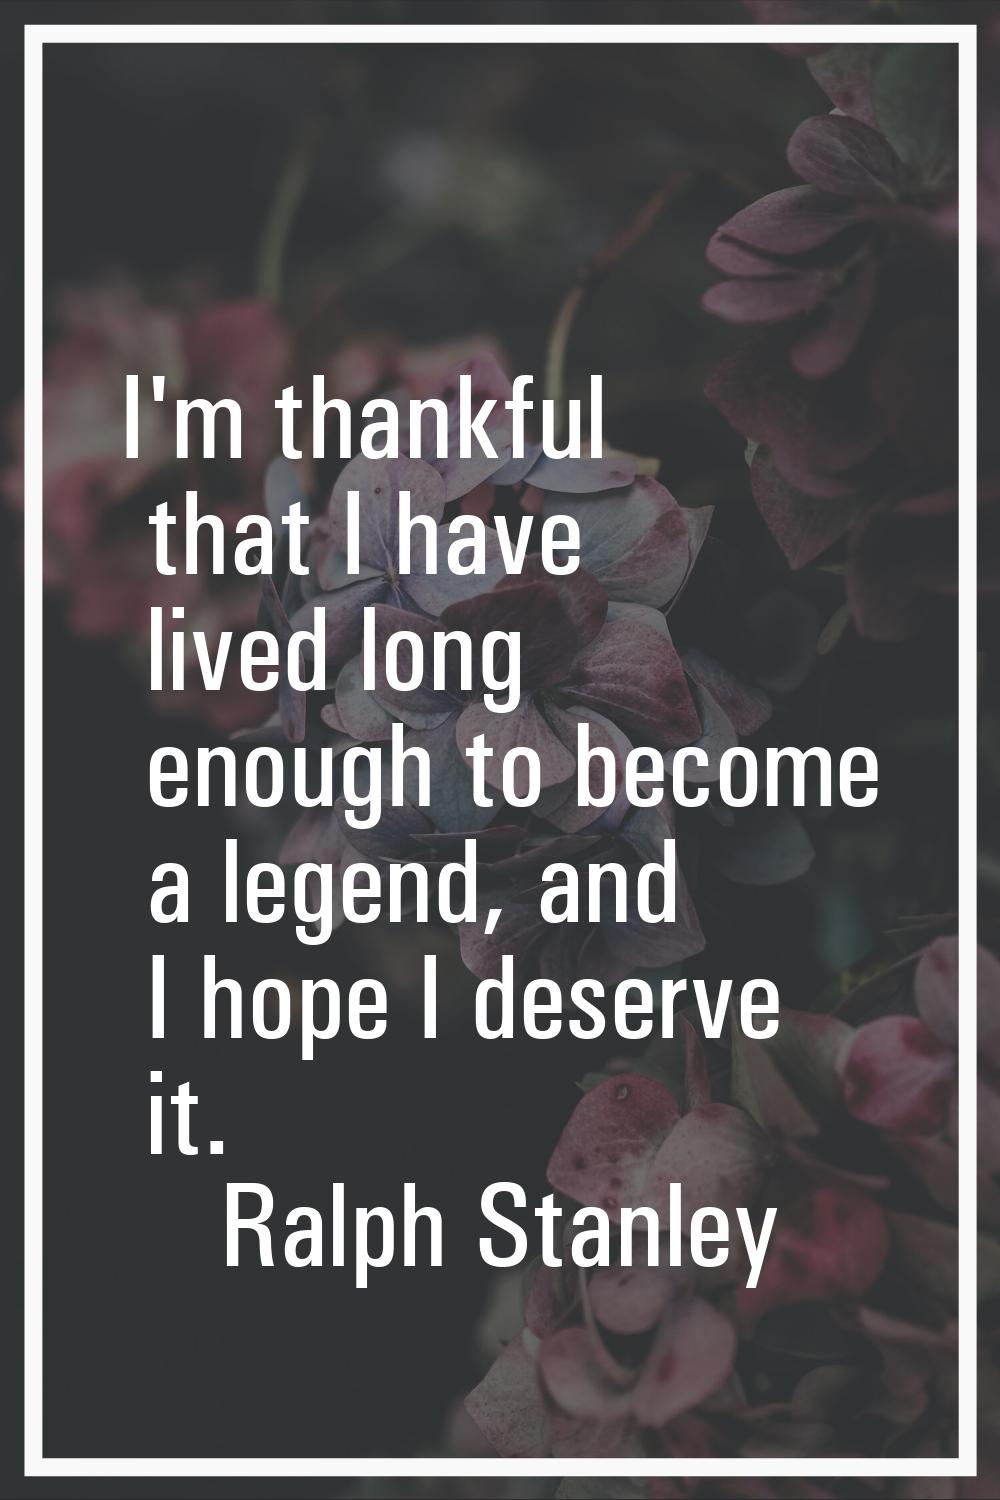 I'm thankful that I have lived long enough to become a legend, and I hope I deserve it.